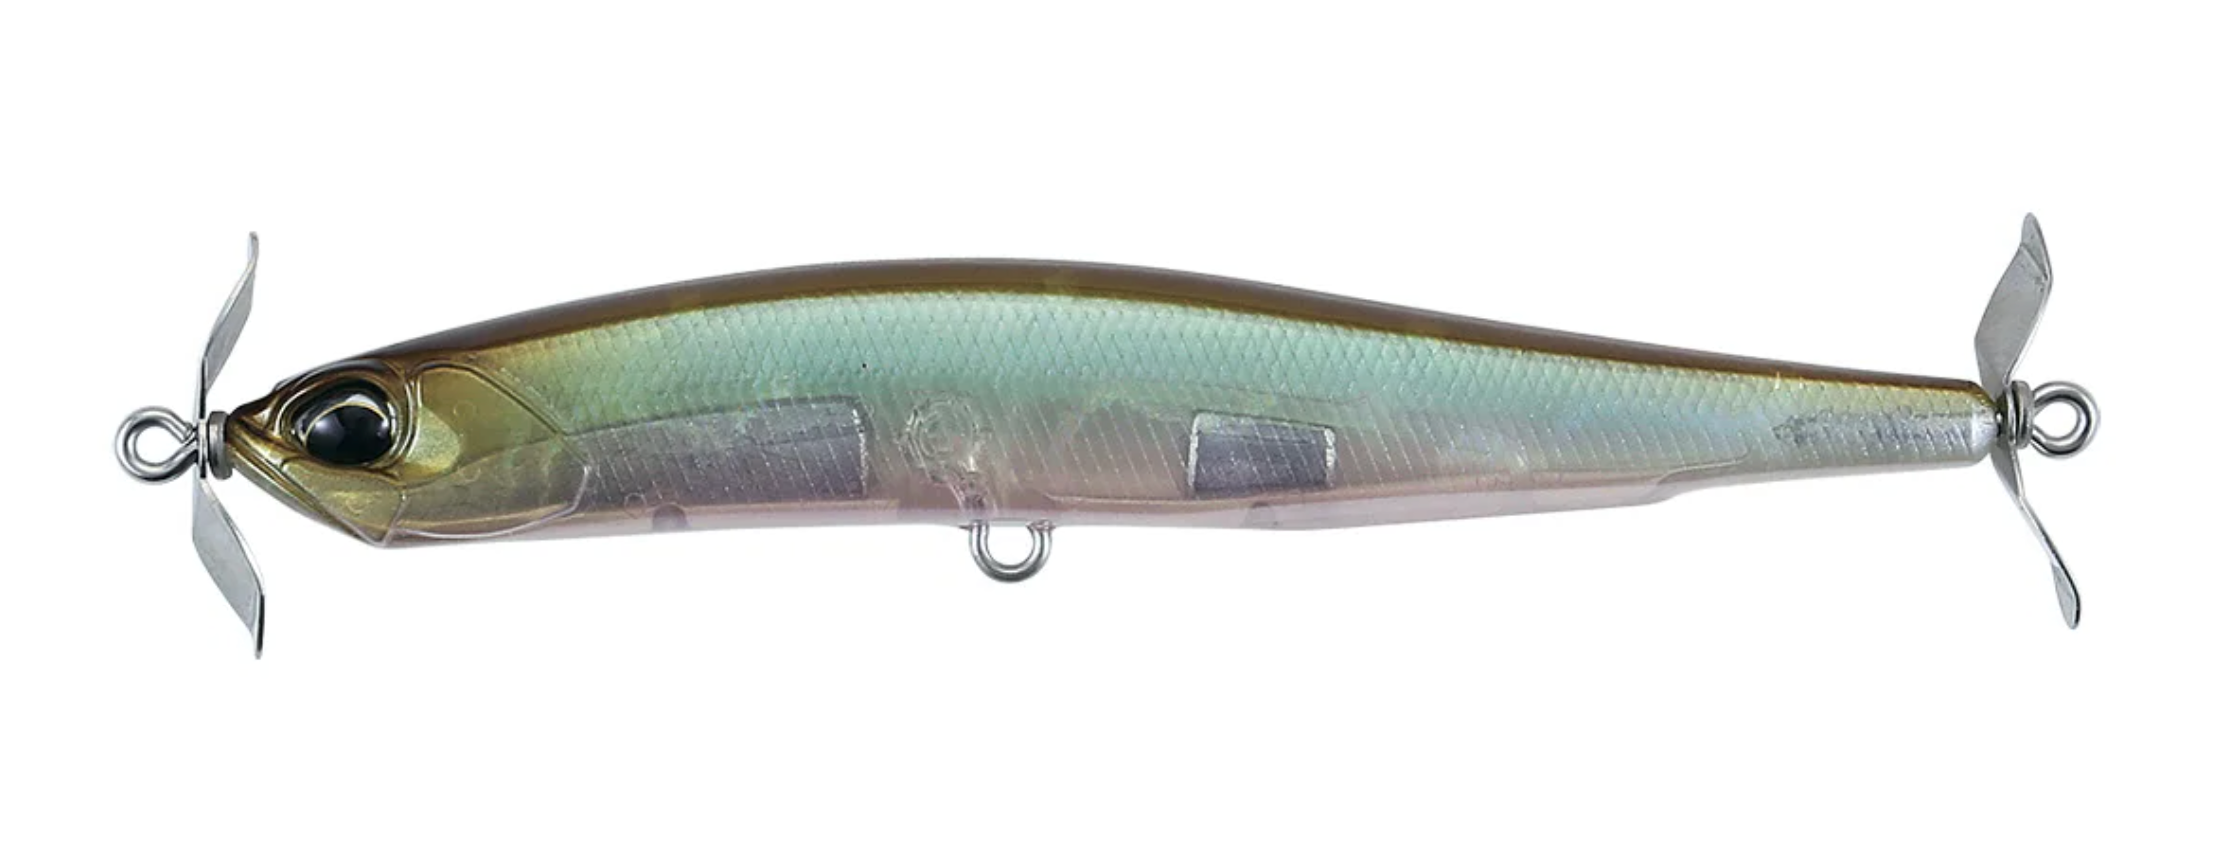 Duo Realis Spinbait 80 GHOST GILL